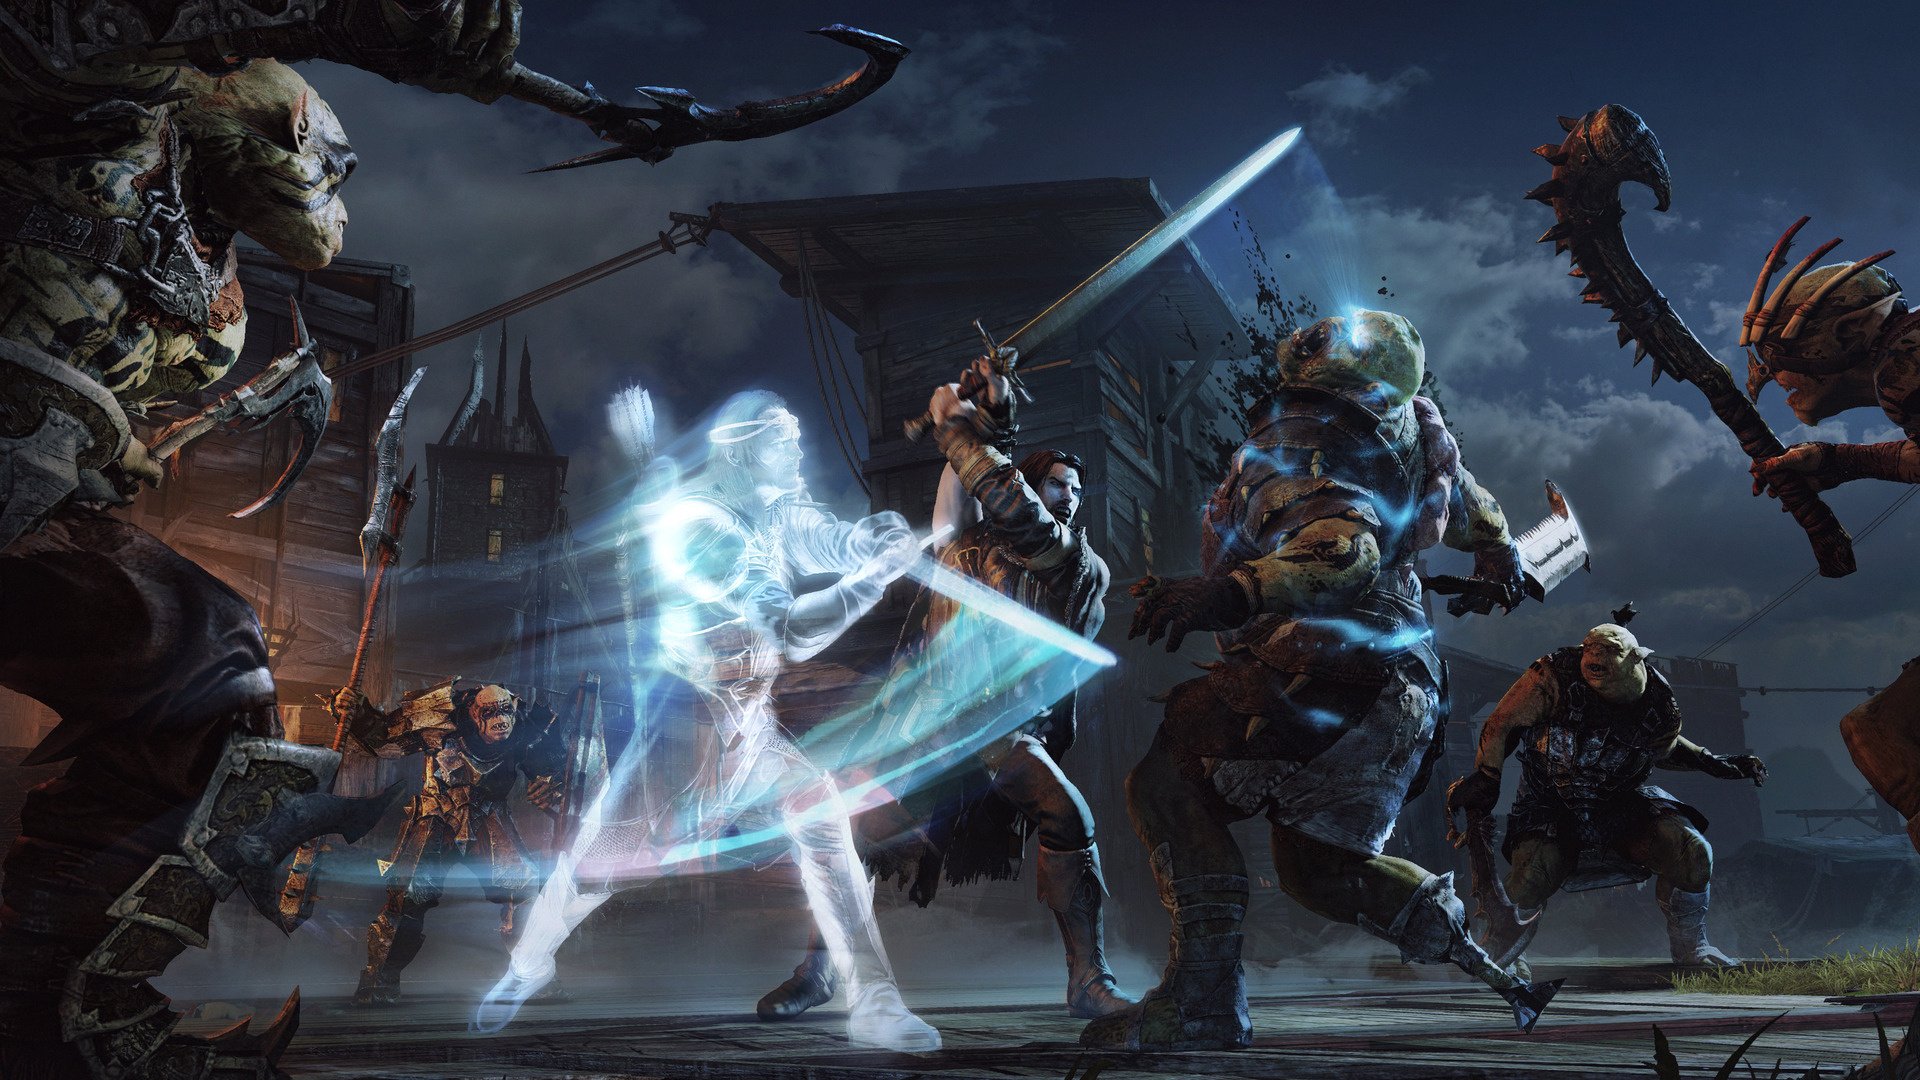 Official Shadow of Mordor Gameplay - Weapons and Runes (With release date)  : r/shadowofmordor